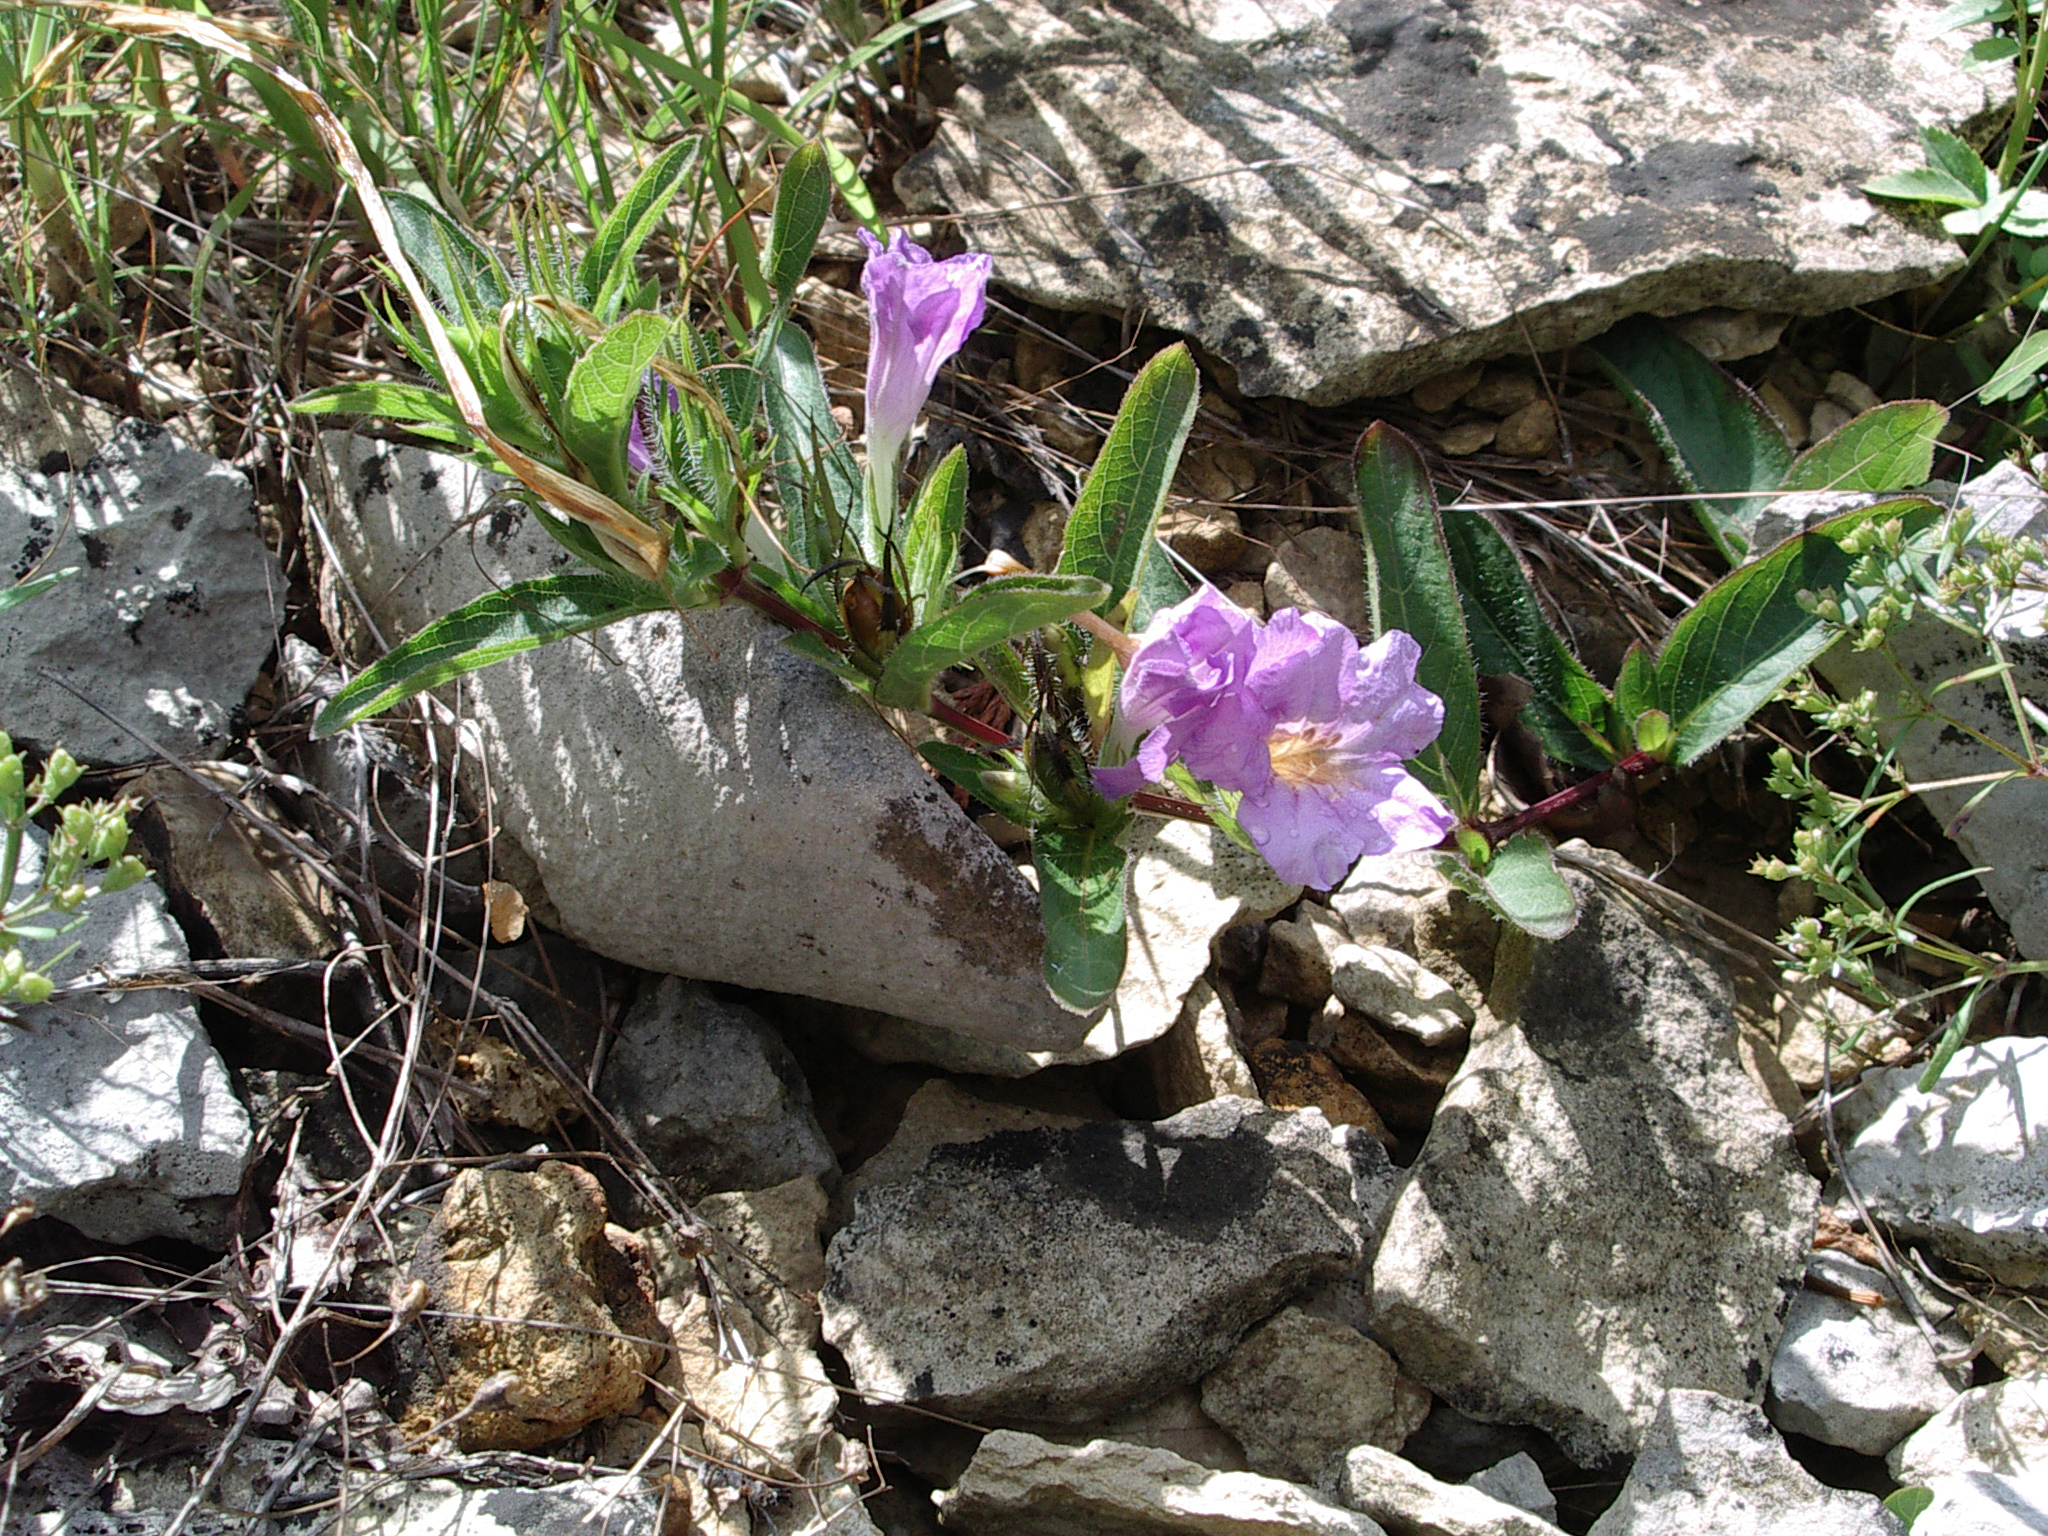 Delicate purple bloom on ground at Rabbit Hash Glade.